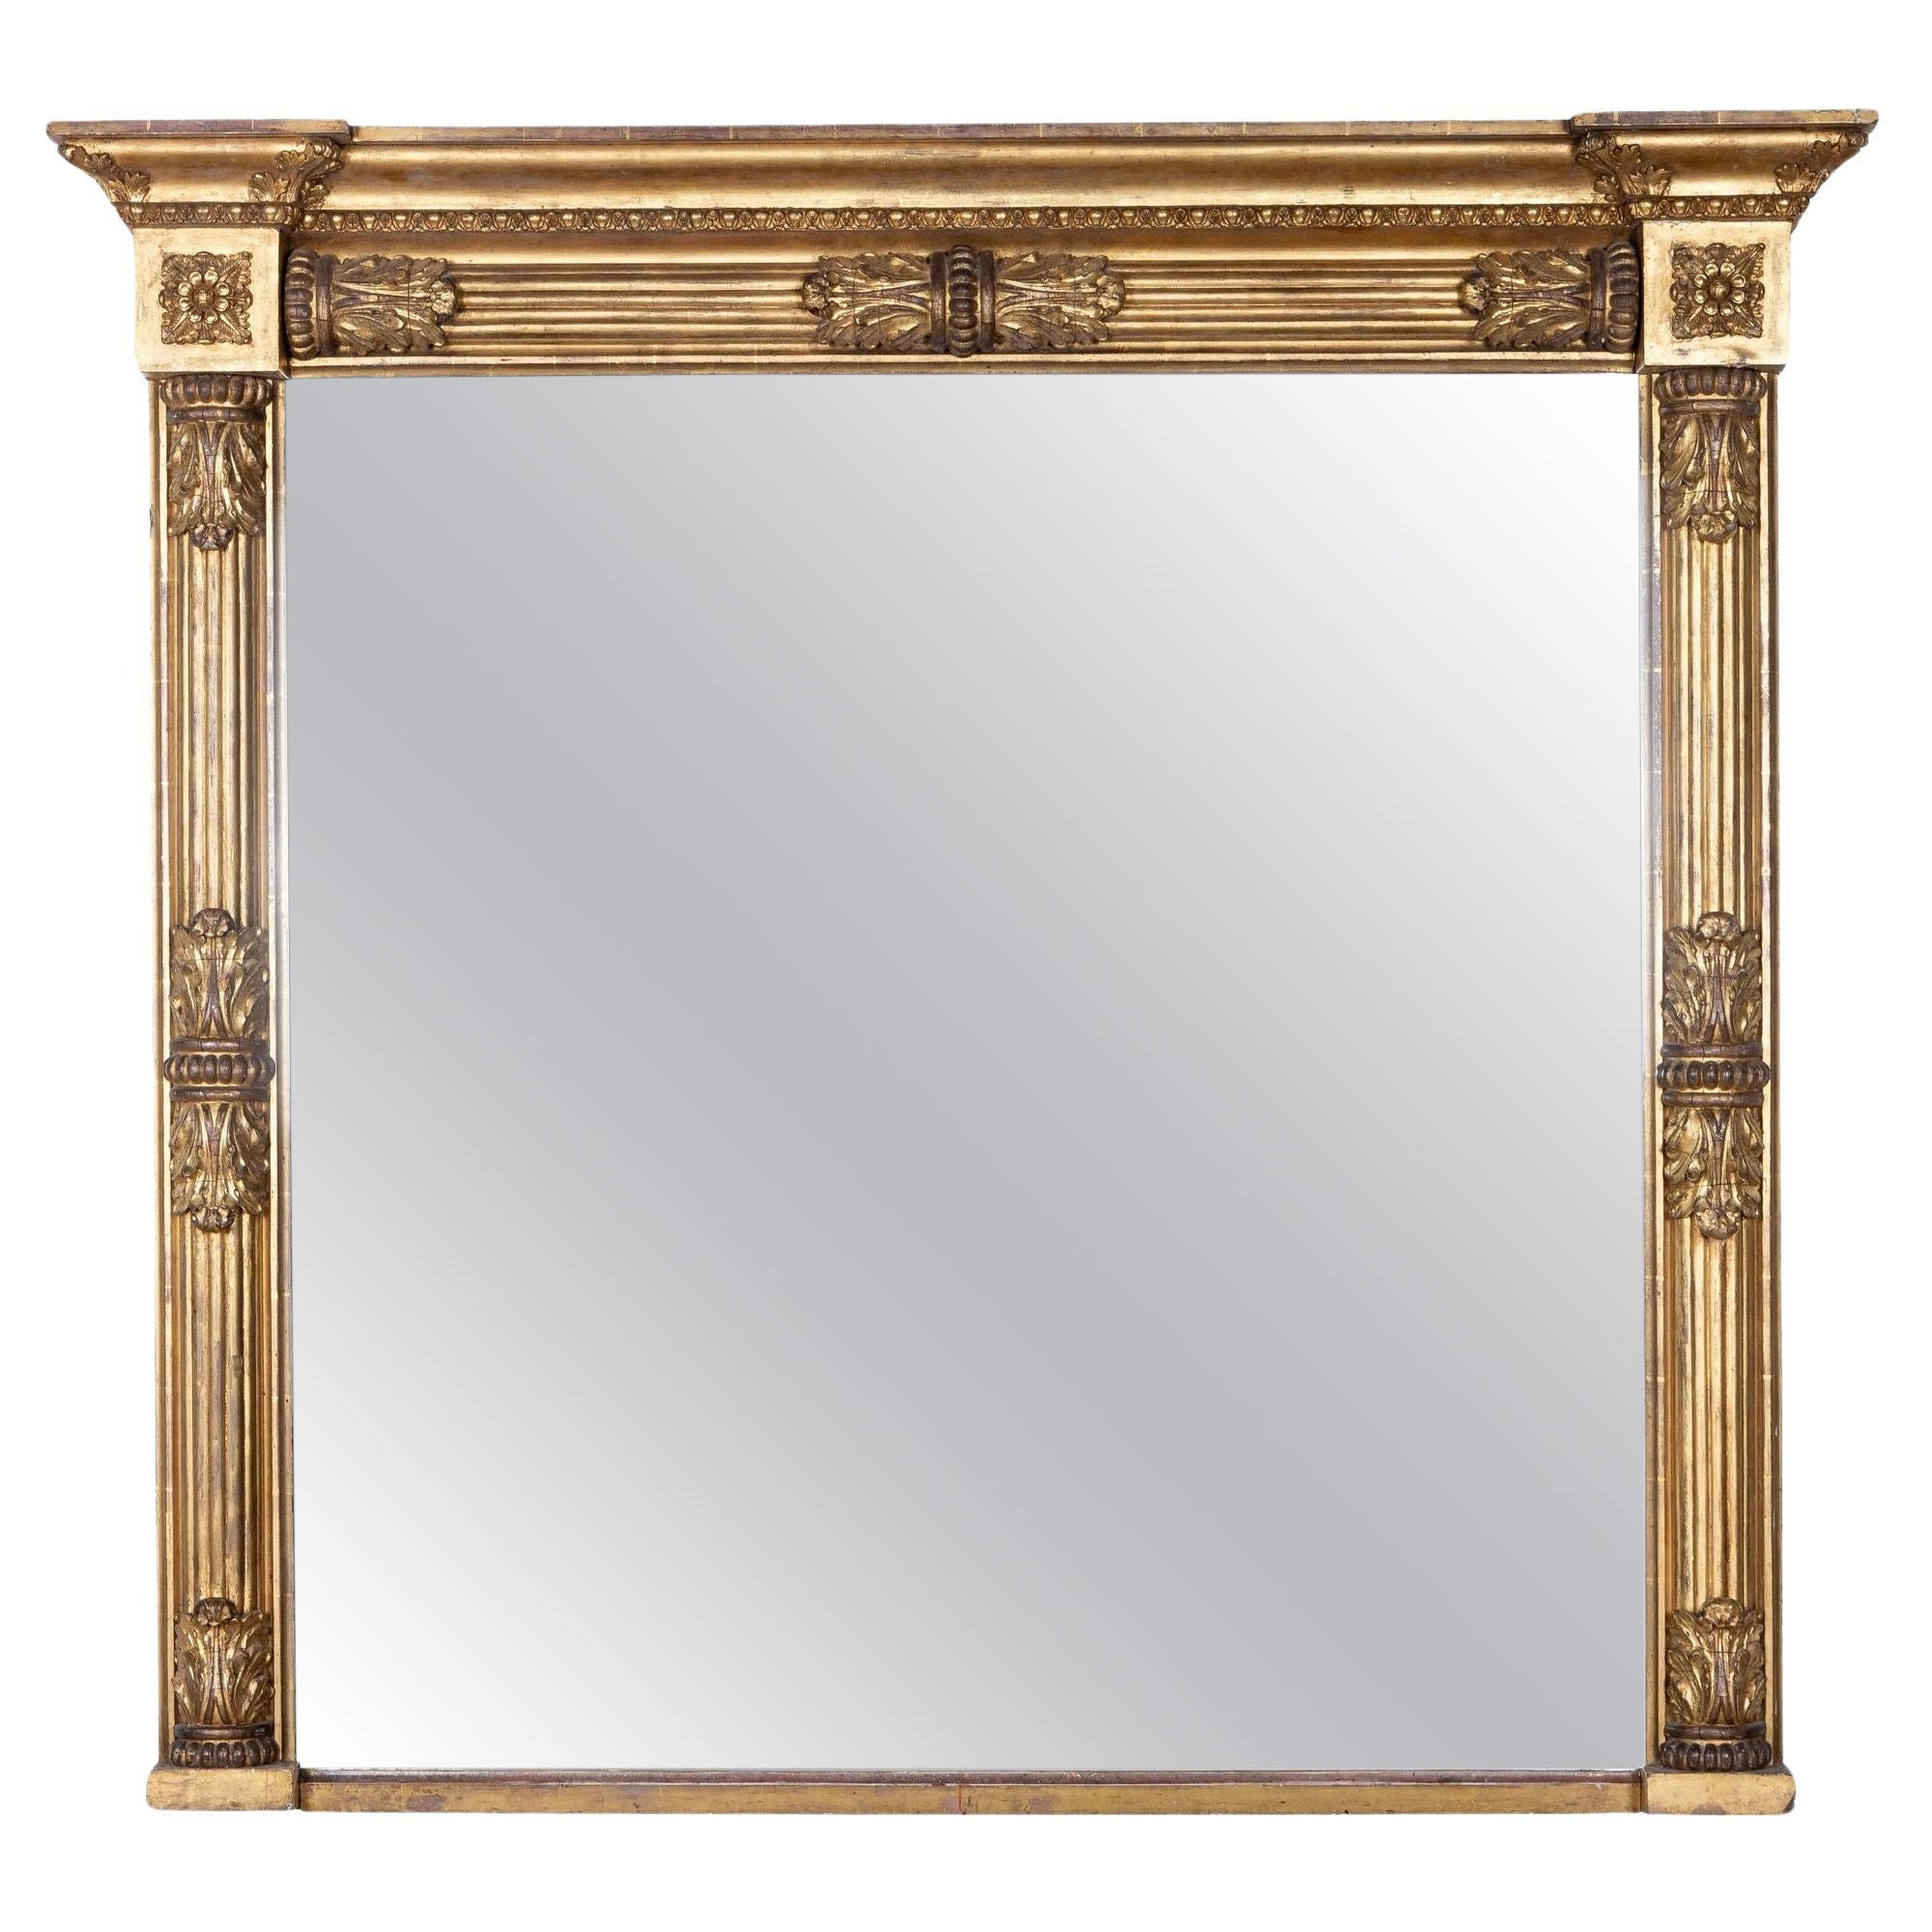 Oversized Neoclassical Gilt Mirror, English Early 20th C. For Sale